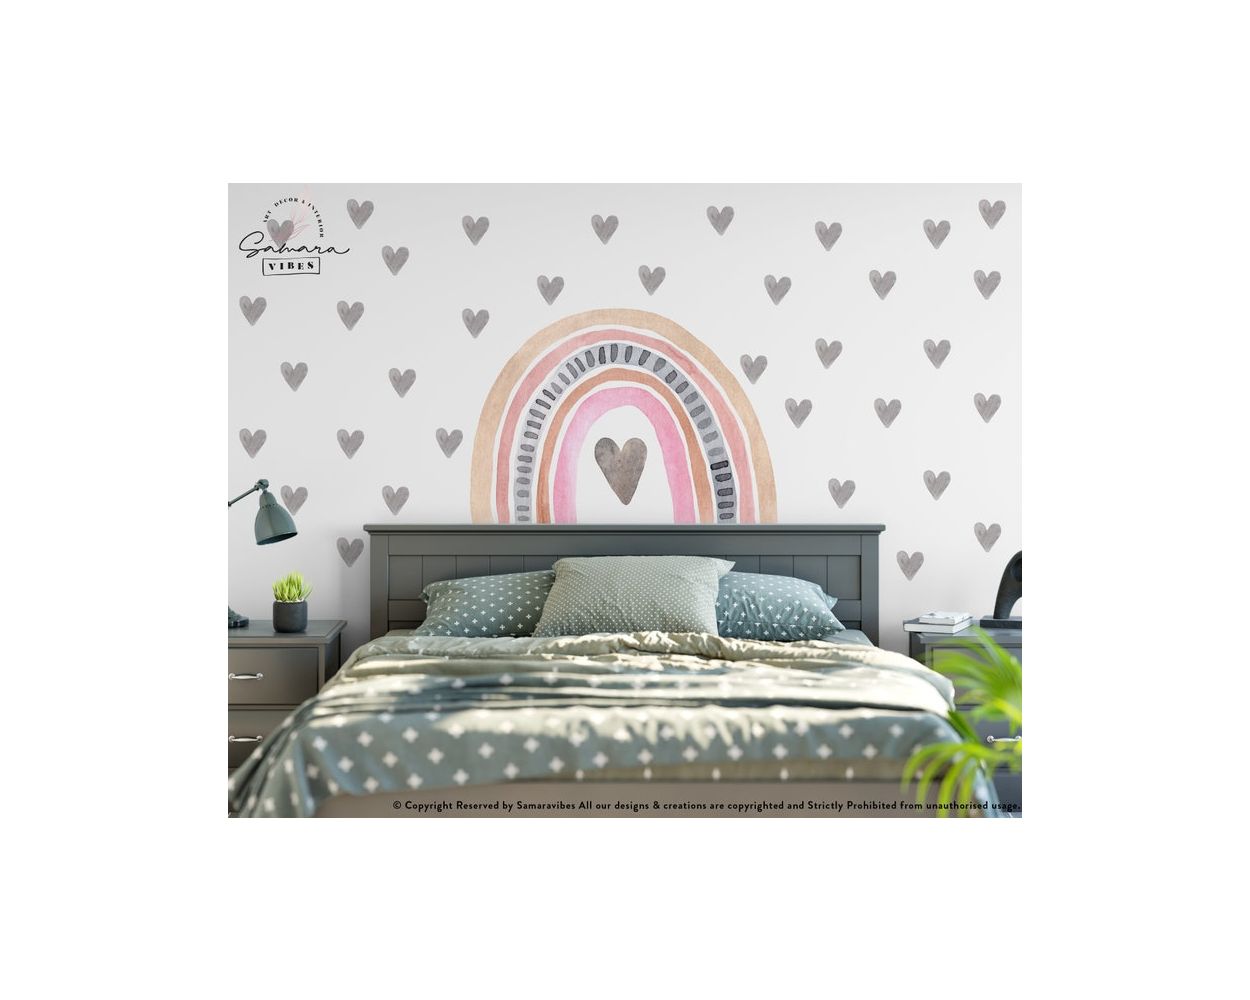 Cute and Best Rainbow with Heart vinyl Wall Stickers for Kids Room Decor